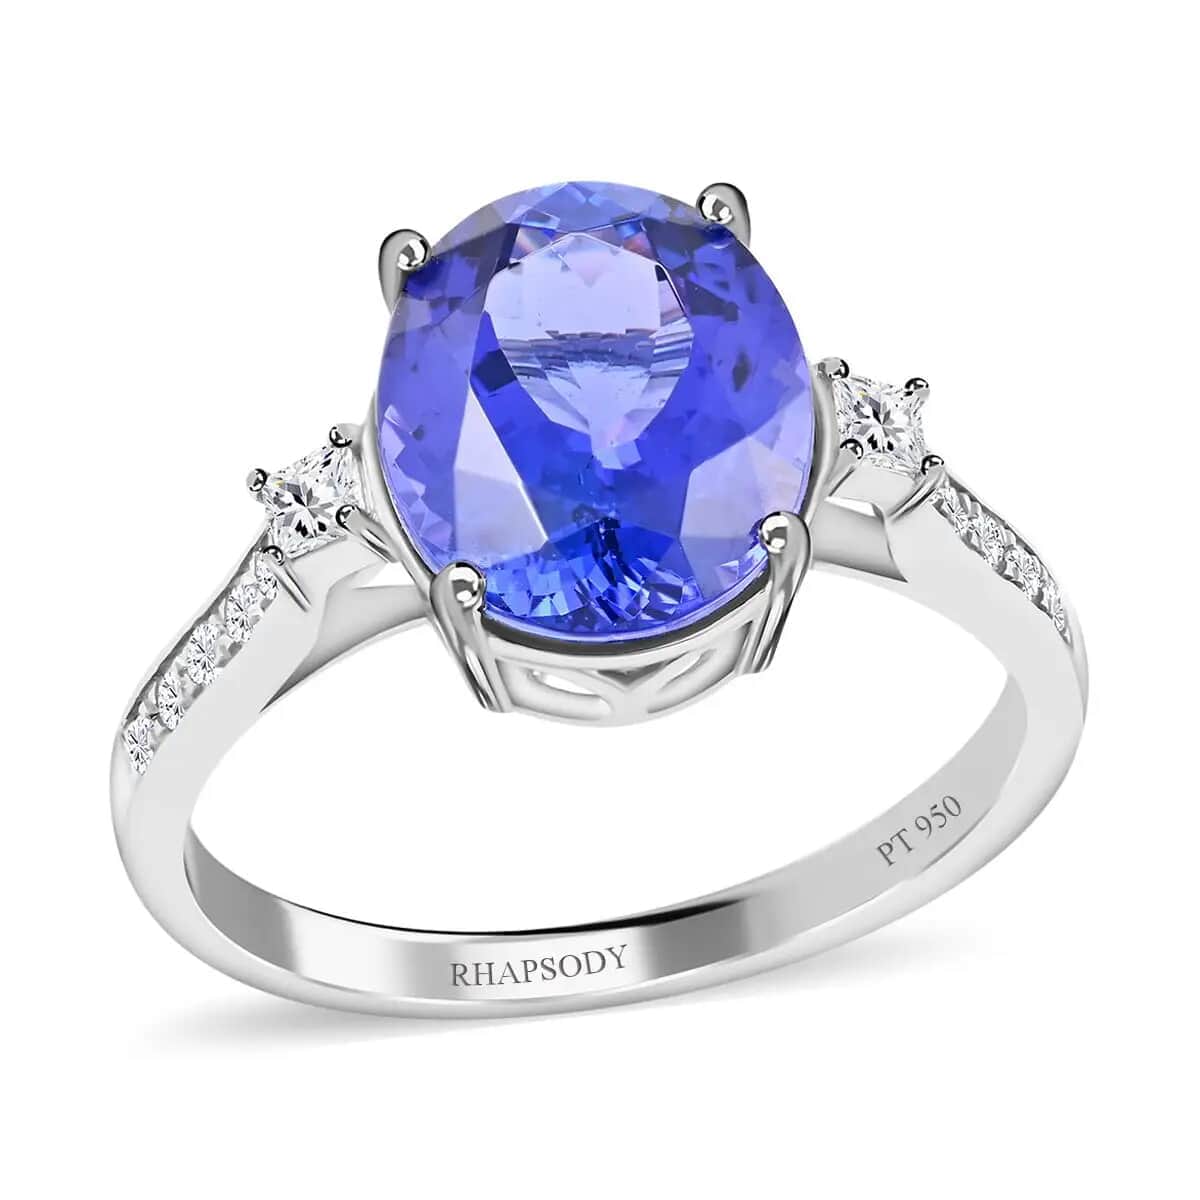 Rhapsody Certified and Appraised AAAA Tanzanite Ring,  E-F VS Diamond Accent Ring,  950 Platinum Ring, Tanzanite Jewelry For Her 5 Grams 4.35 ctw (Size 6) image number 0